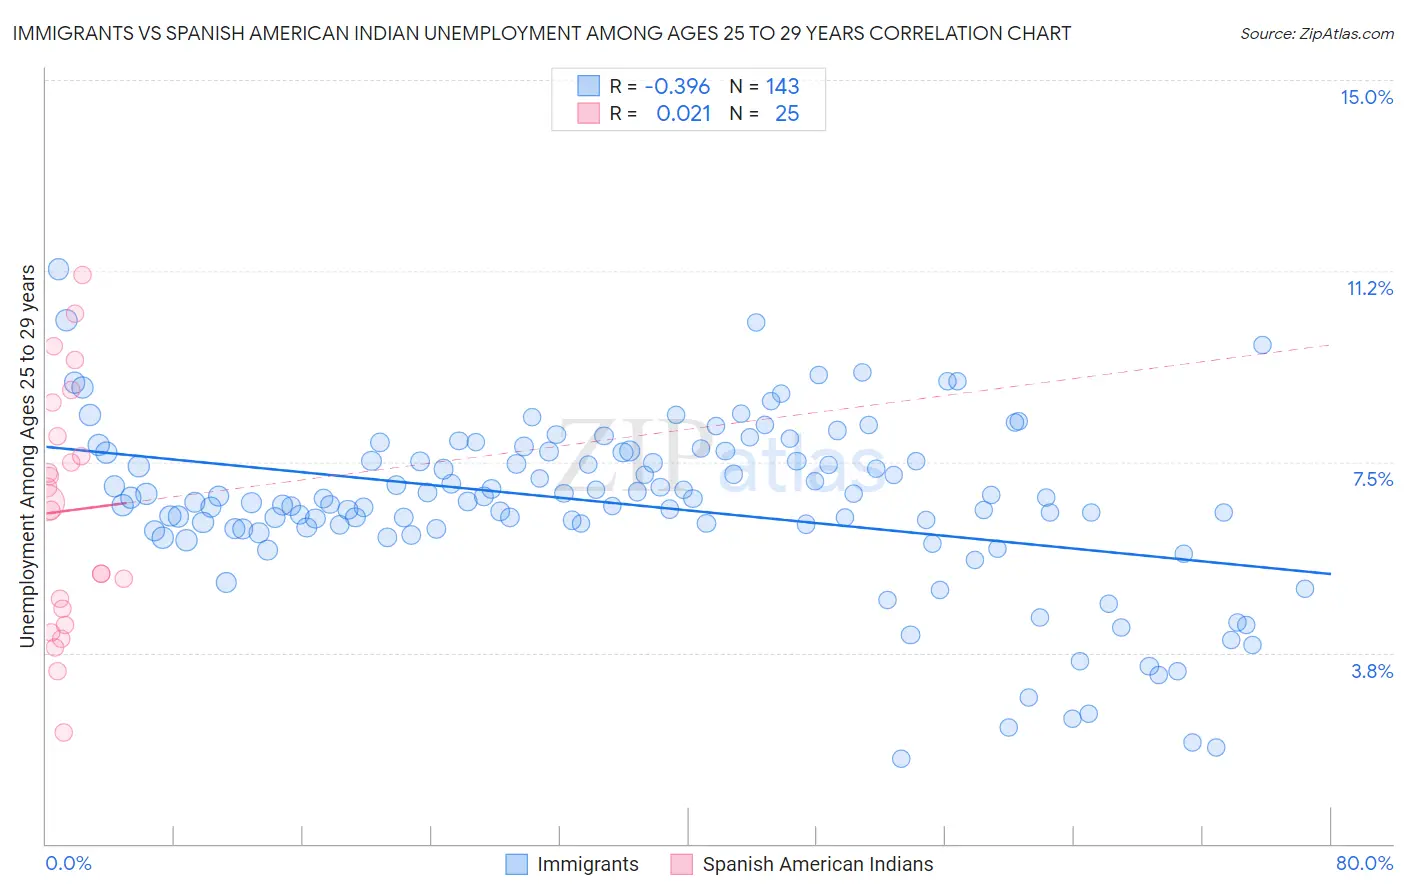 Immigrants vs Spanish American Indian Unemployment Among Ages 25 to 29 years